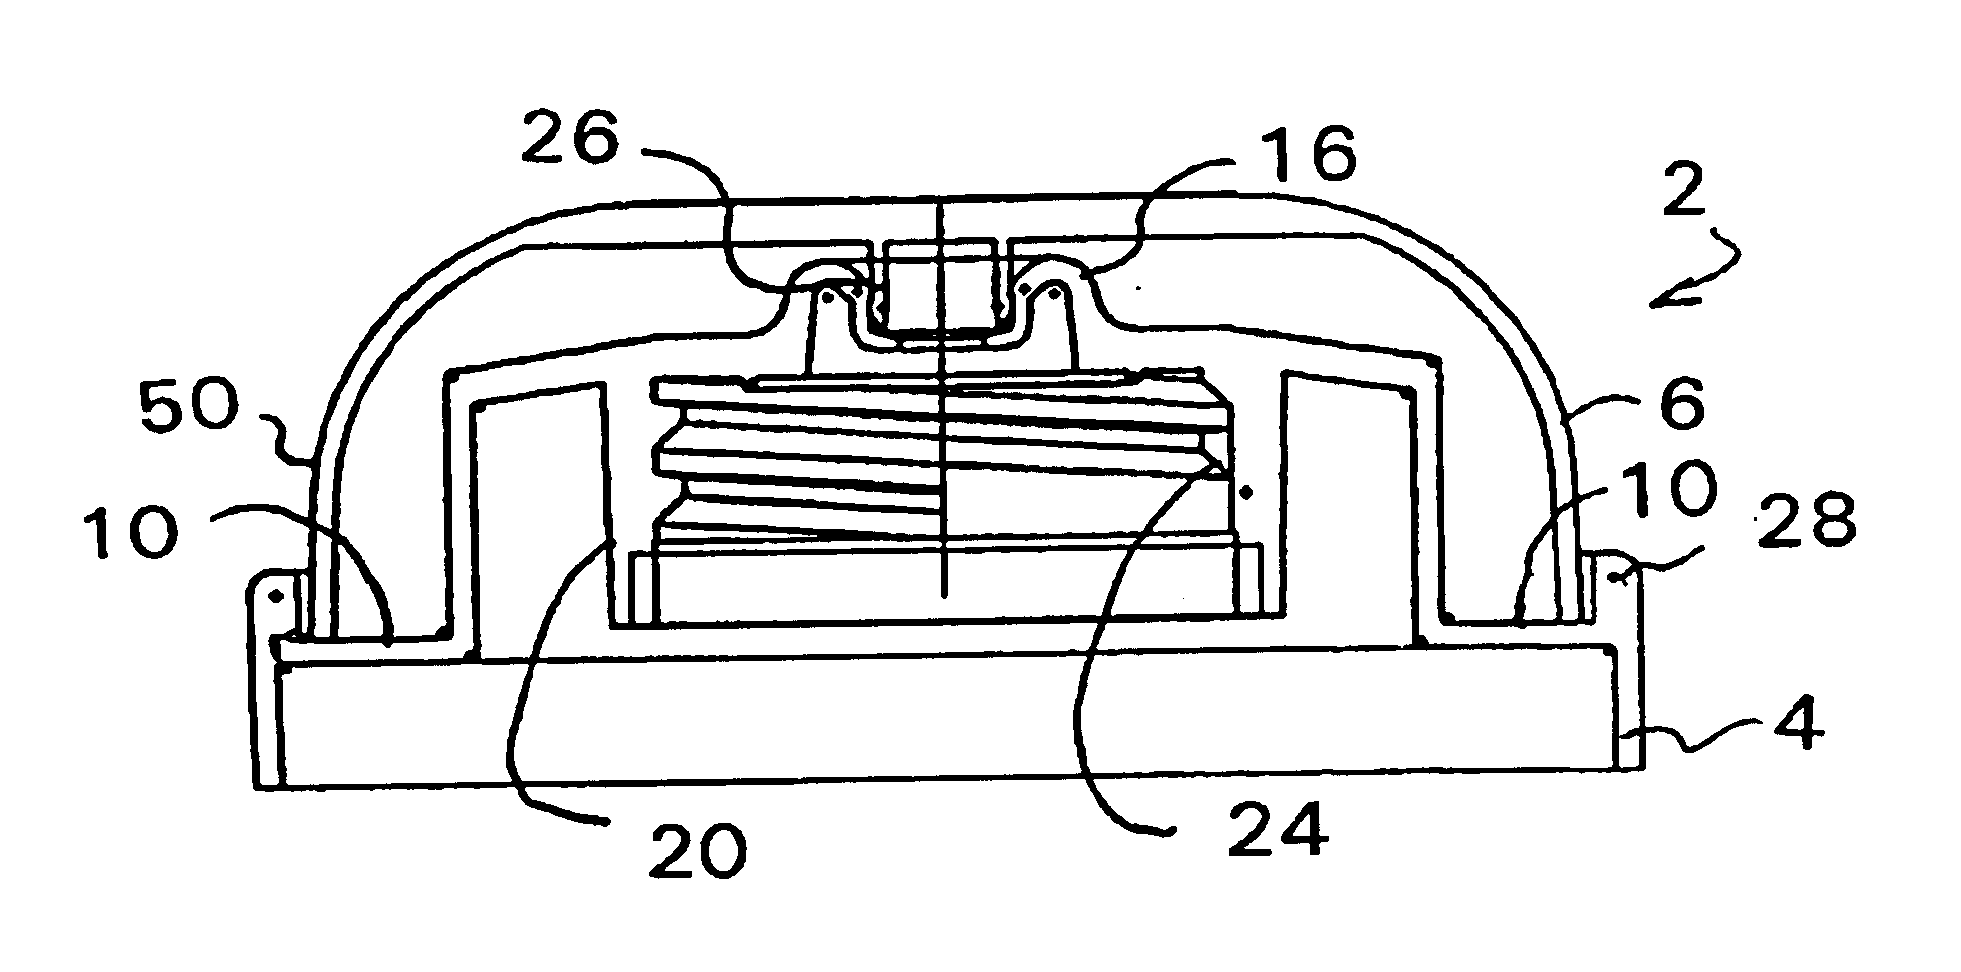 Flip-top closure with child resistant packaging system